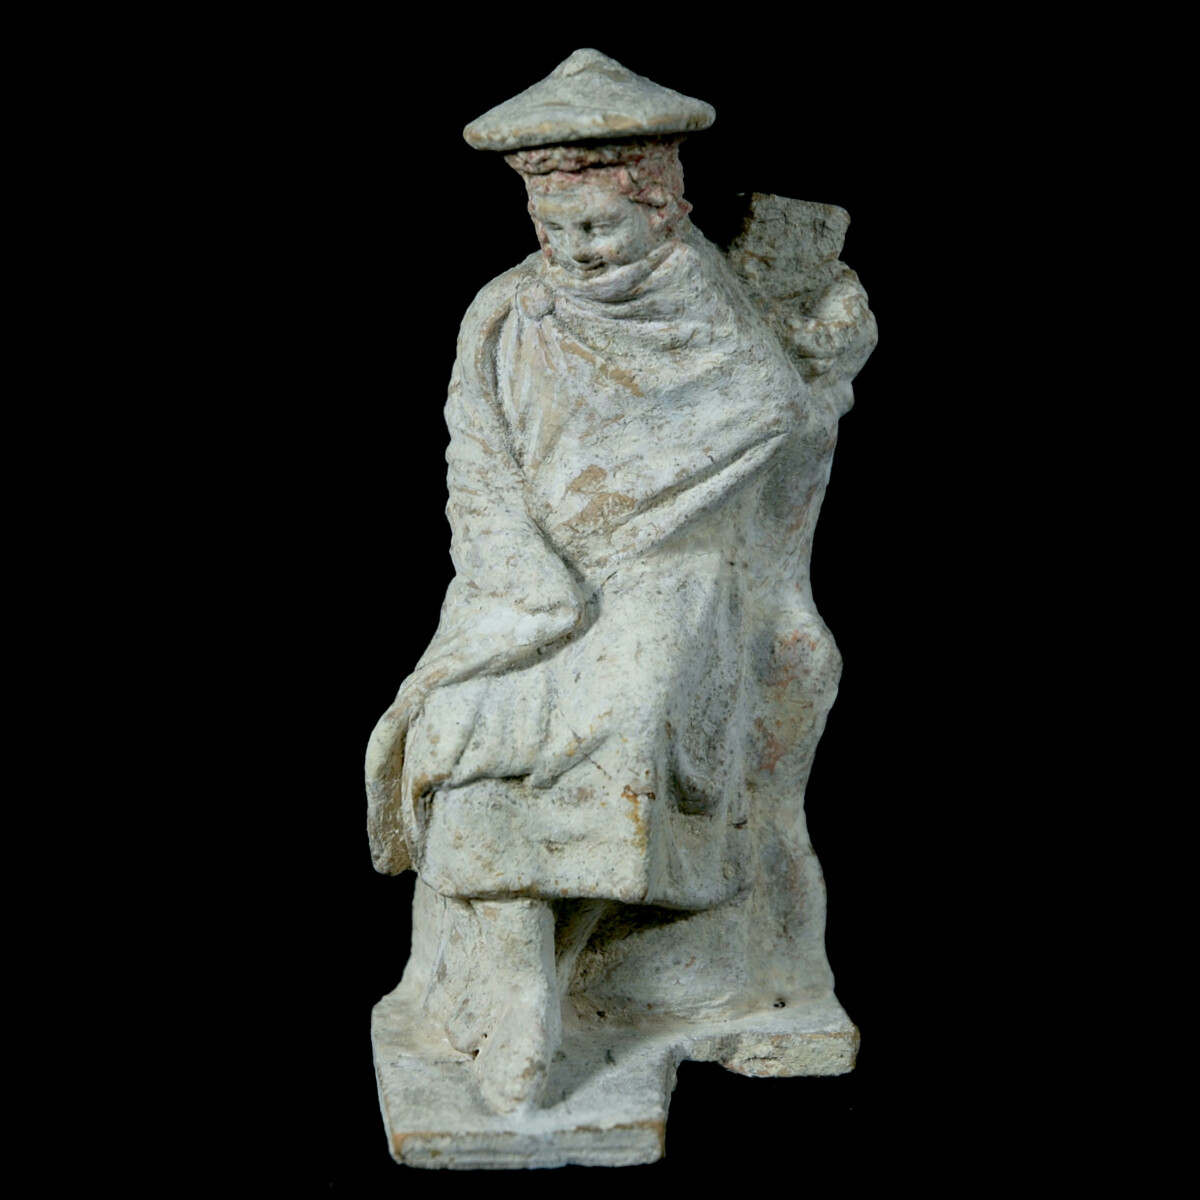 Tanagra statuette of a boy leaning on a stele